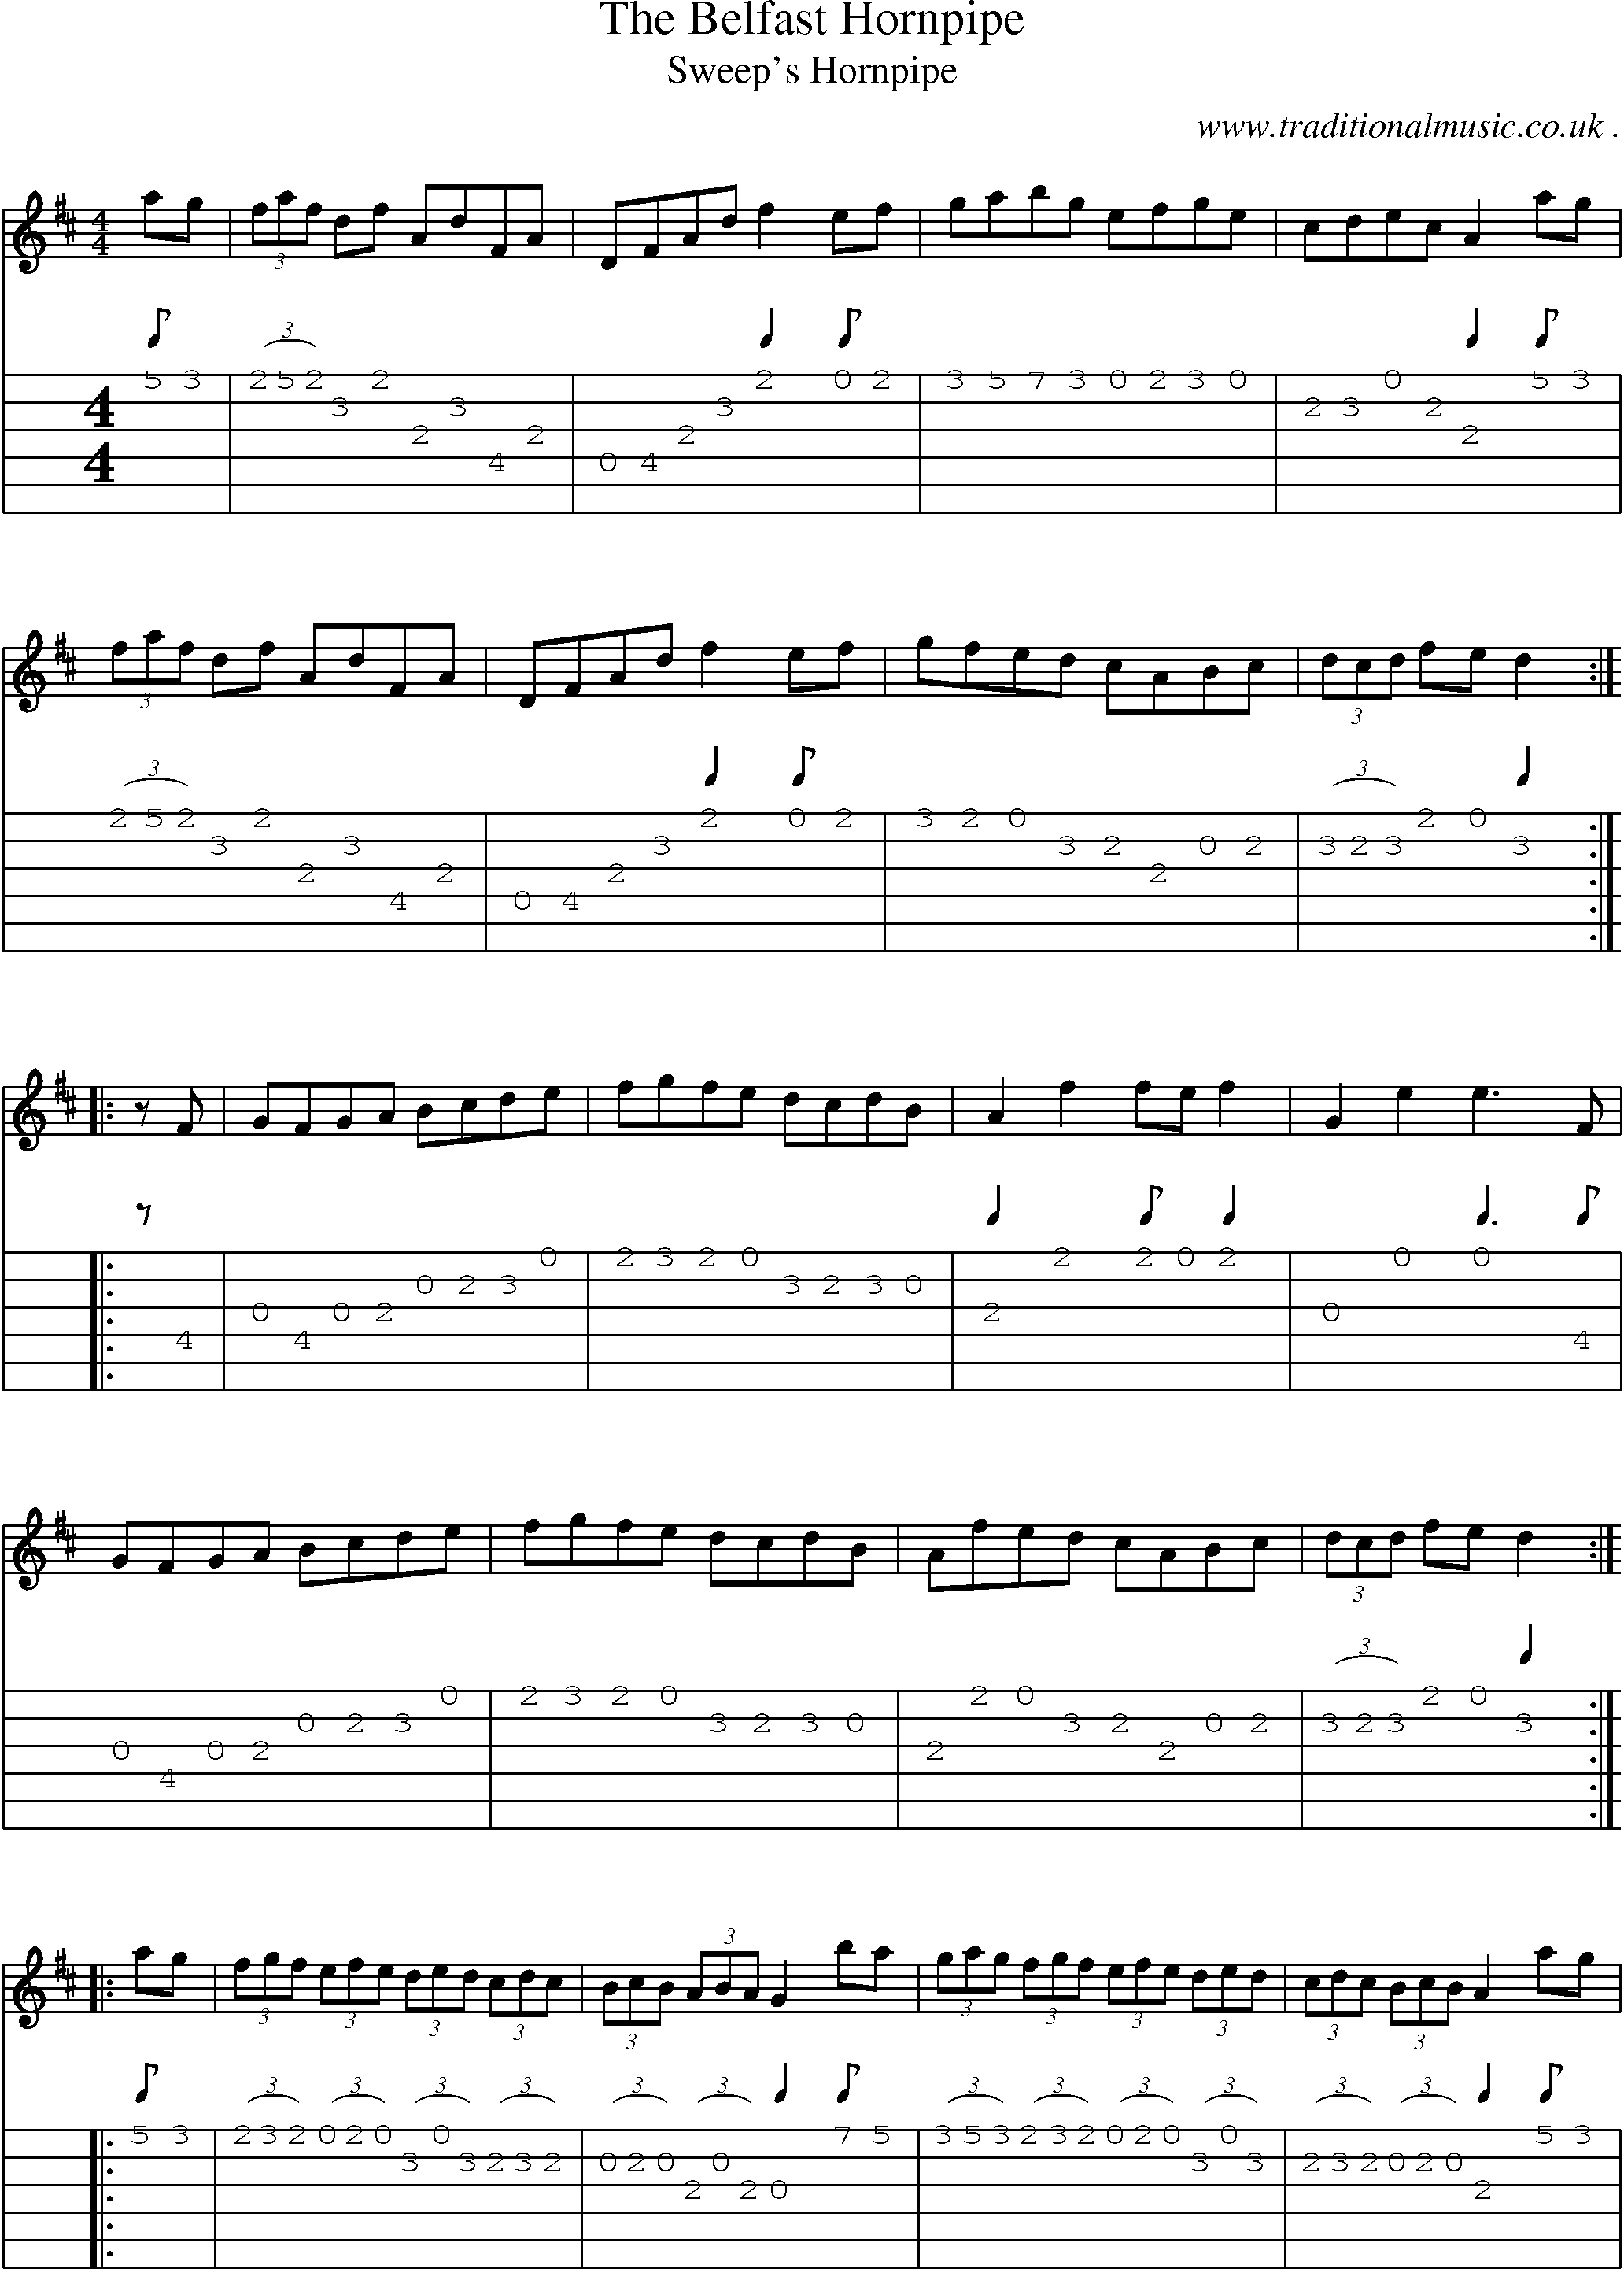 Sheet-Music and Guitar Tabs for The Belfast Hornpipe